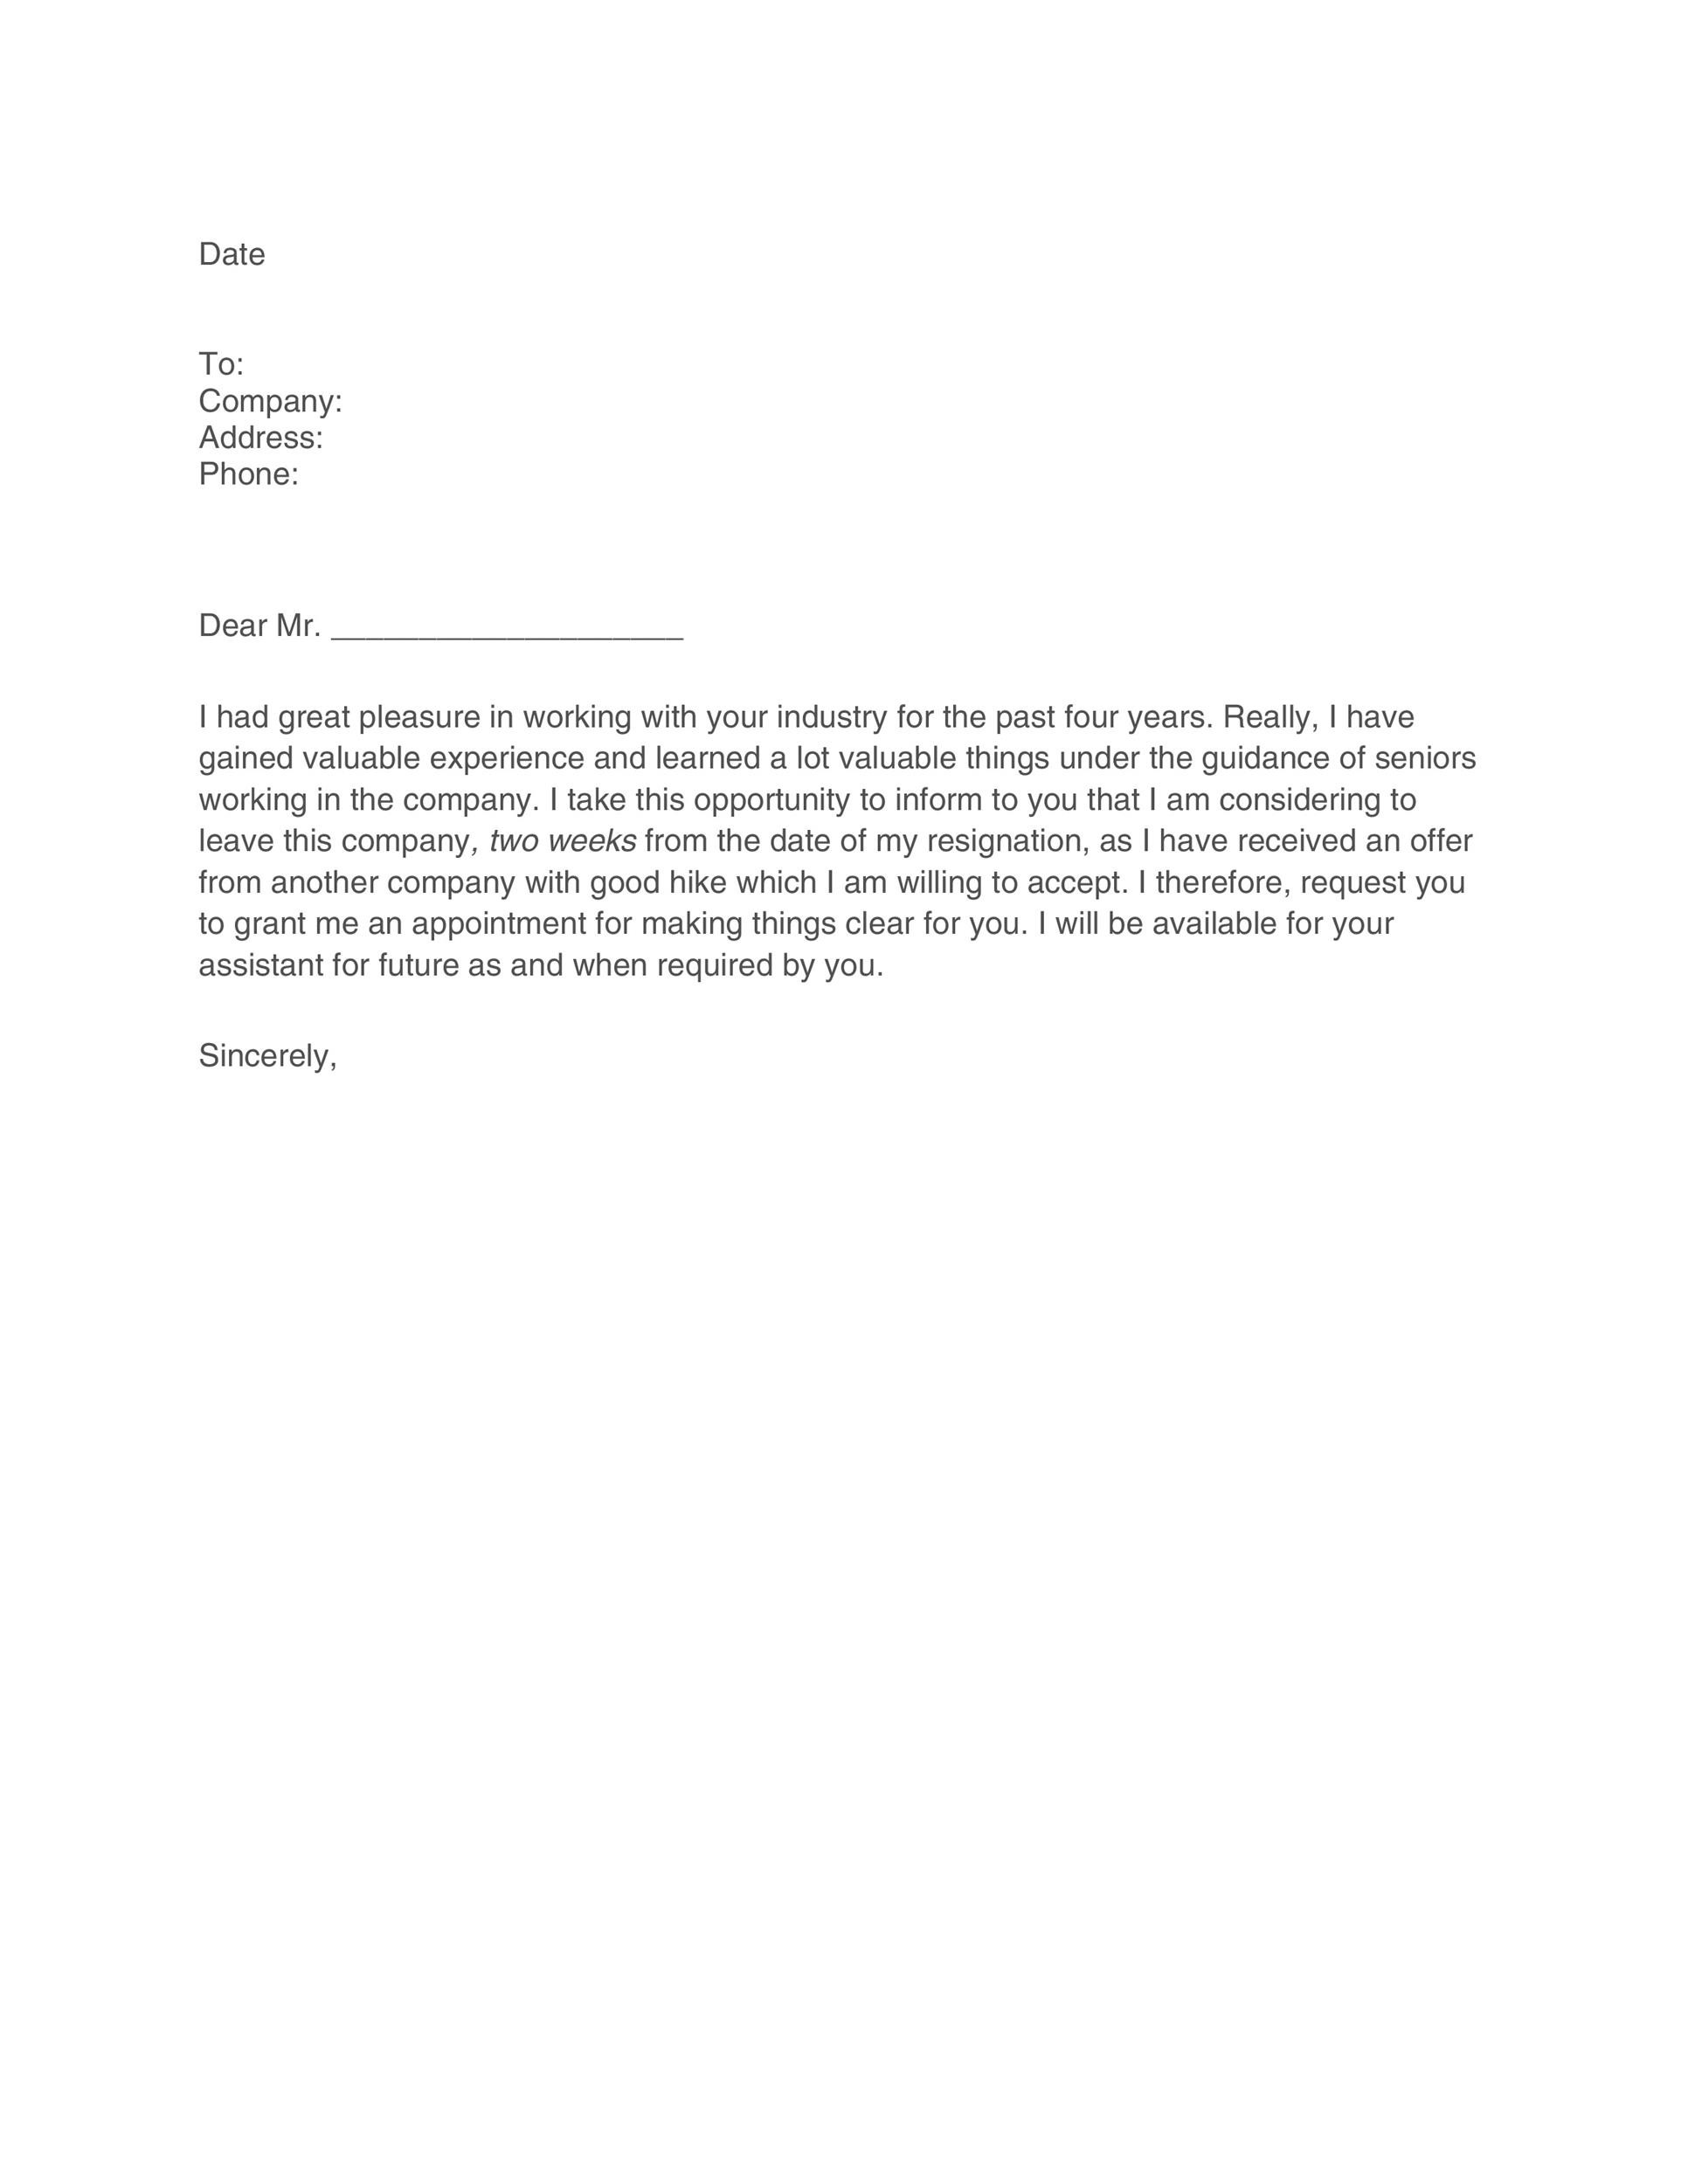 Two weeks notice template